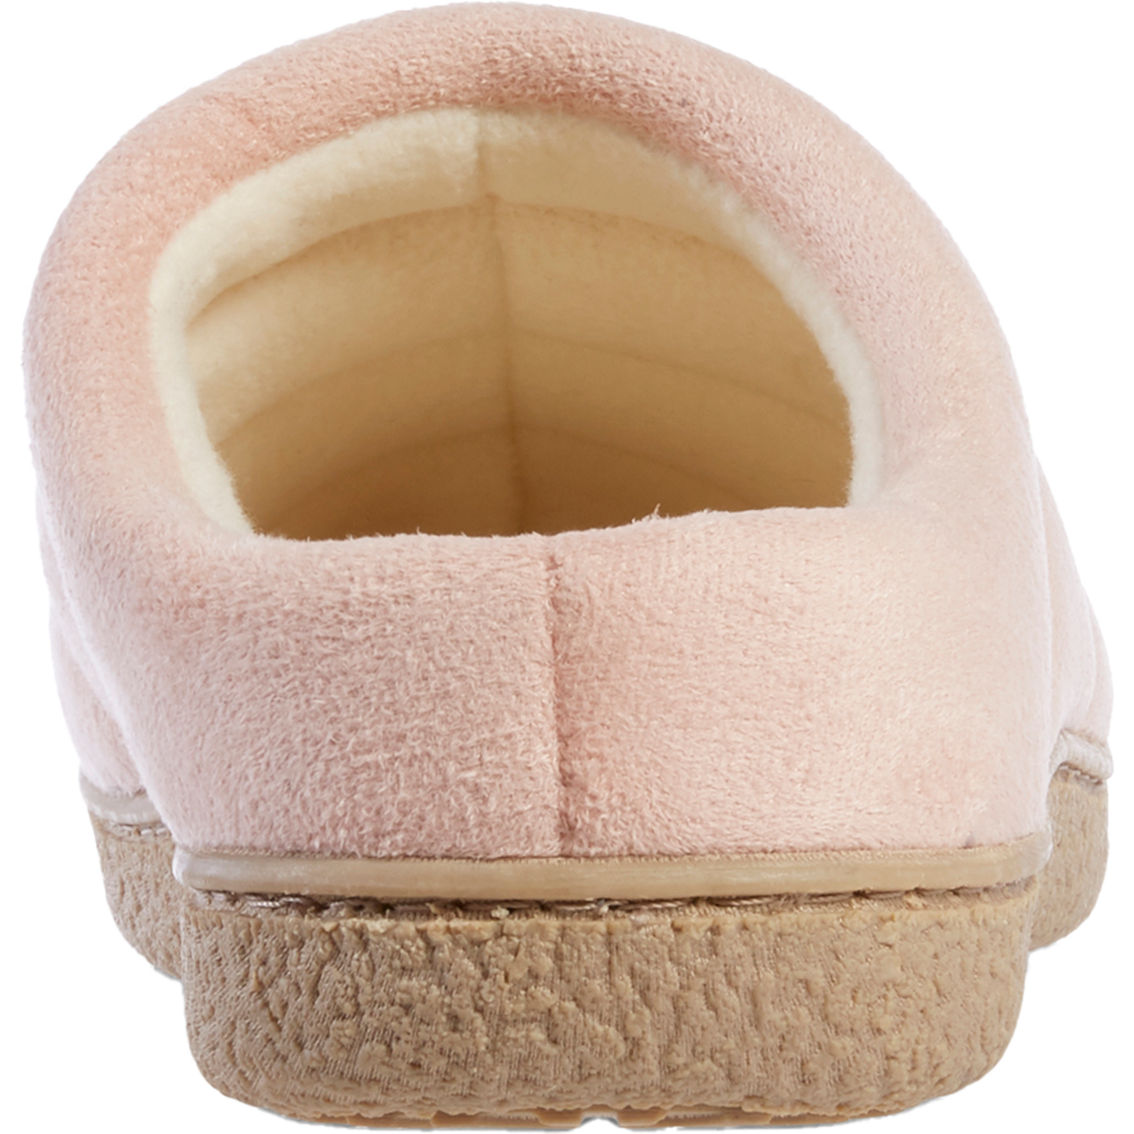 Isotoner Women's Totes Rory Recucled Microsuede Hoodback Slippers - Image 5 of 5